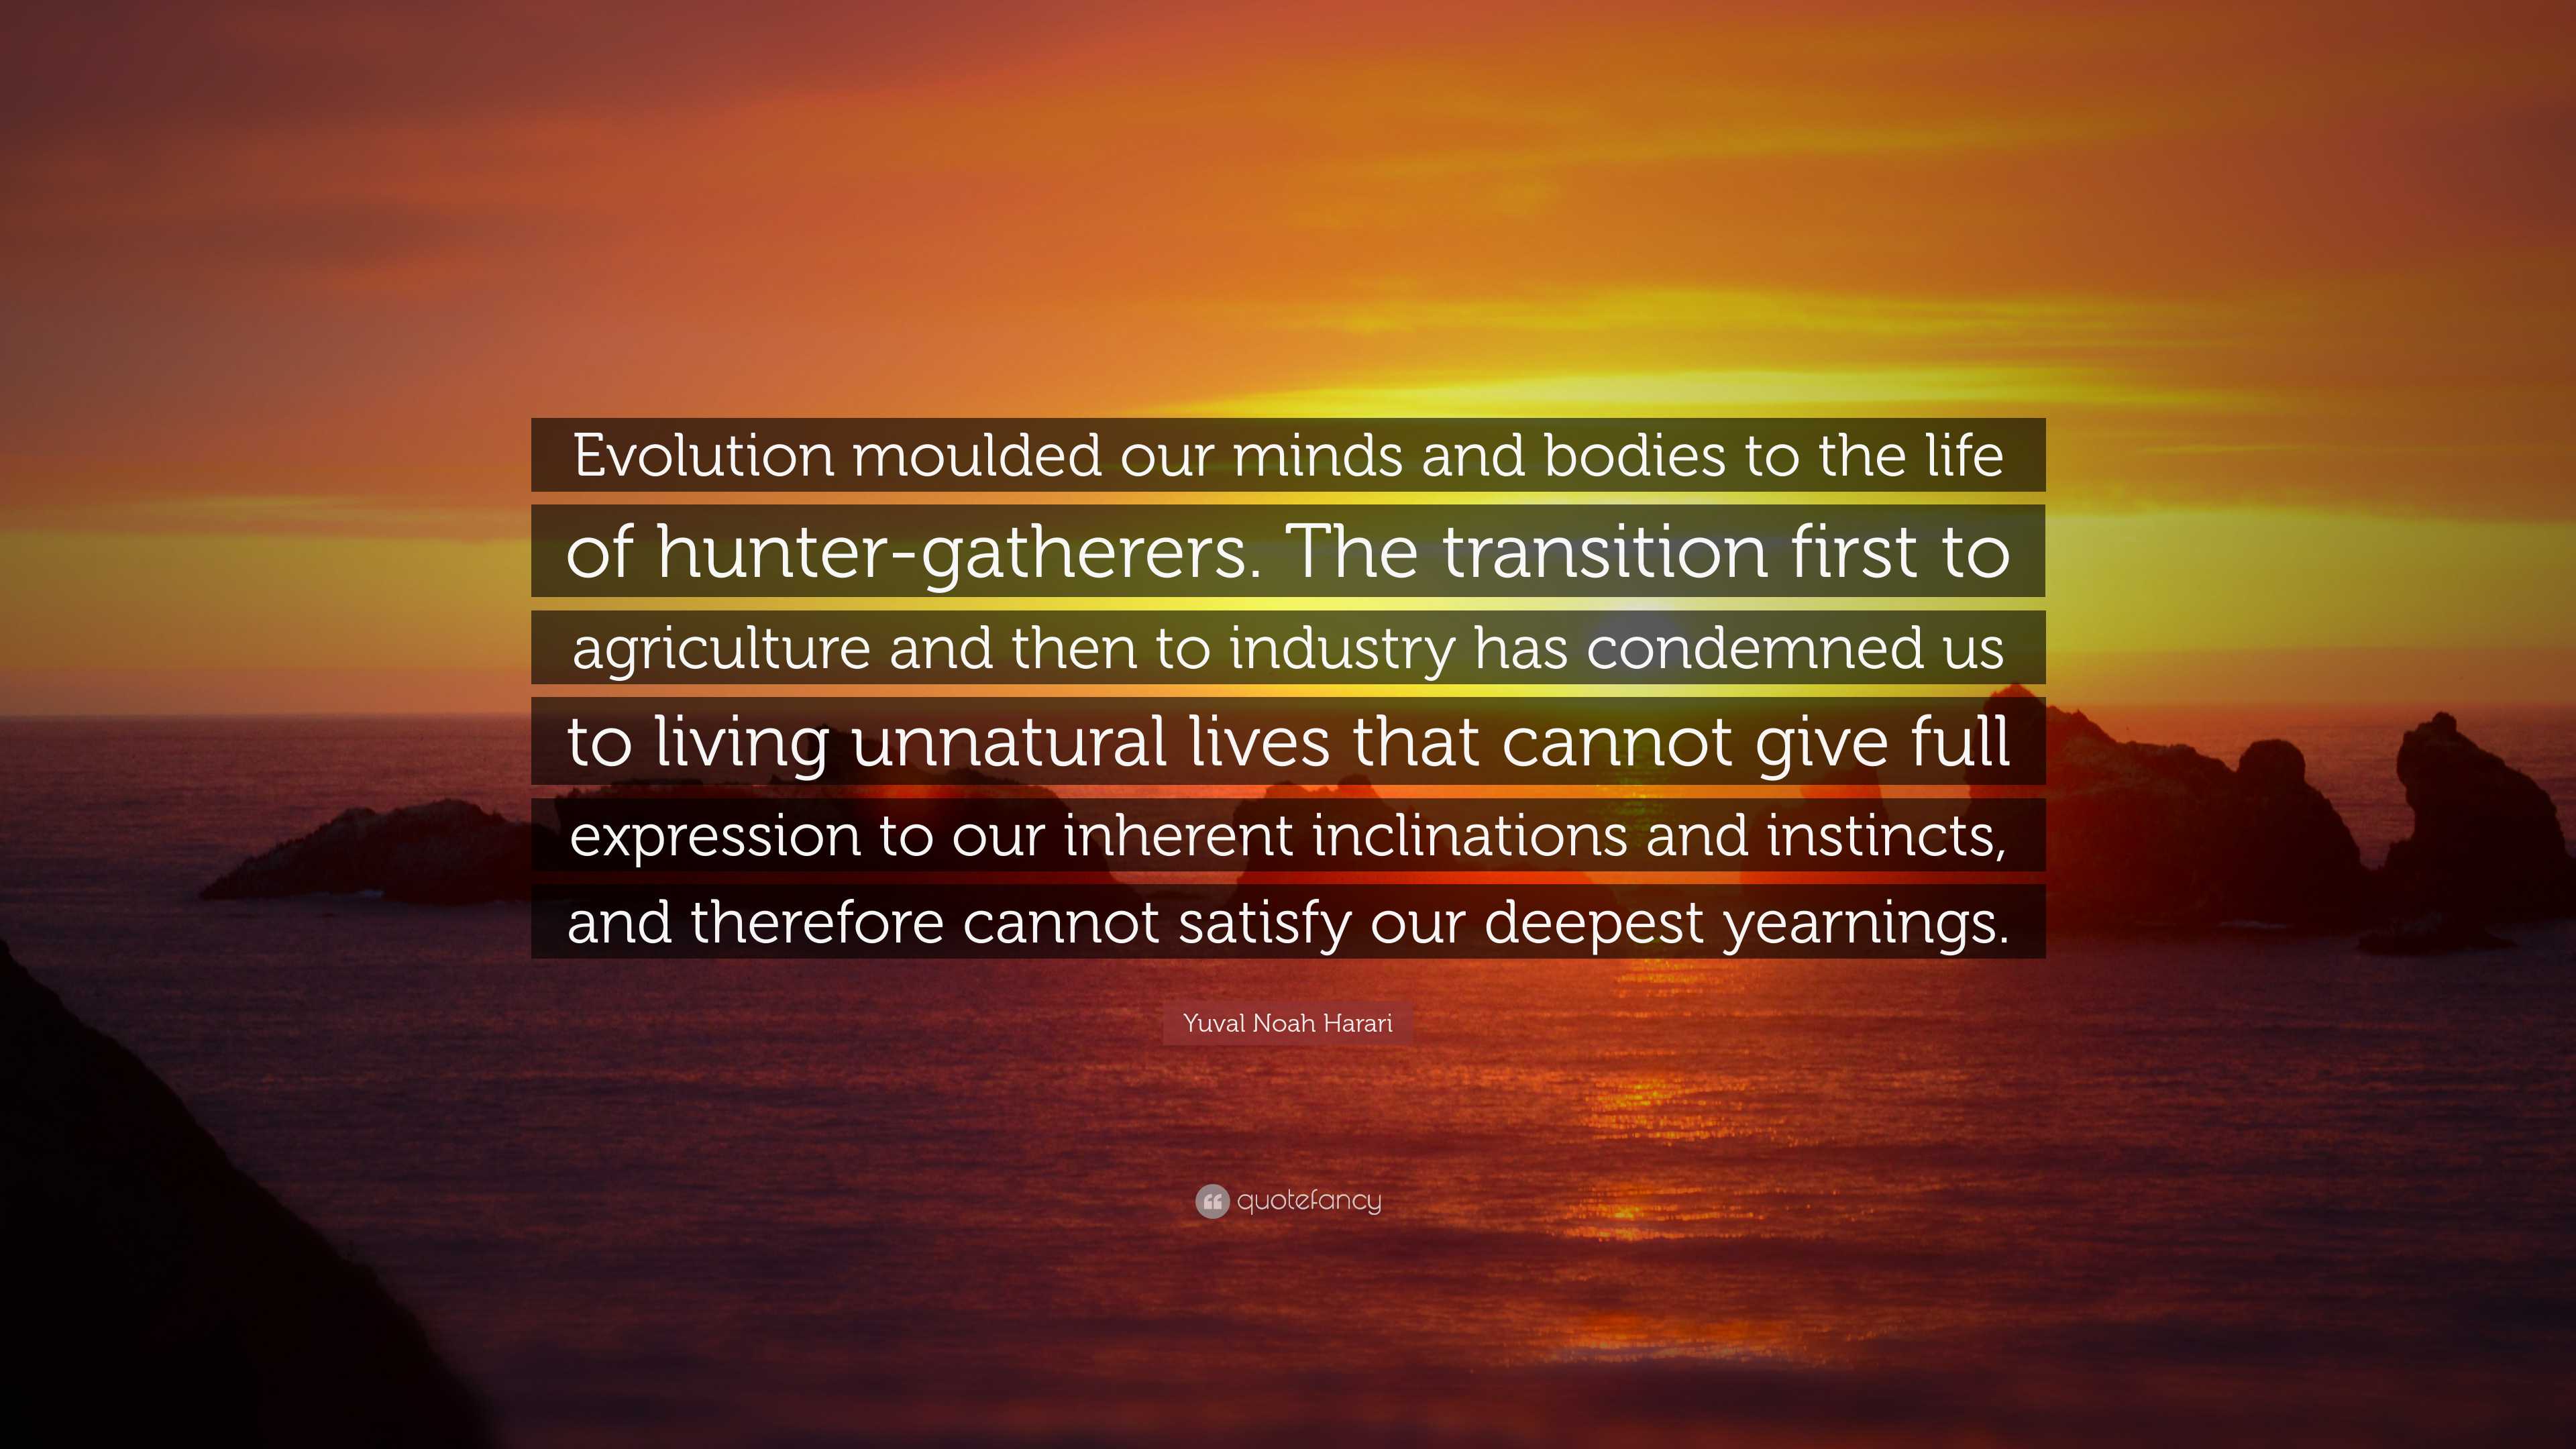 Yuval Noah Harari Quote: “Evolution moulded our minds and bodies